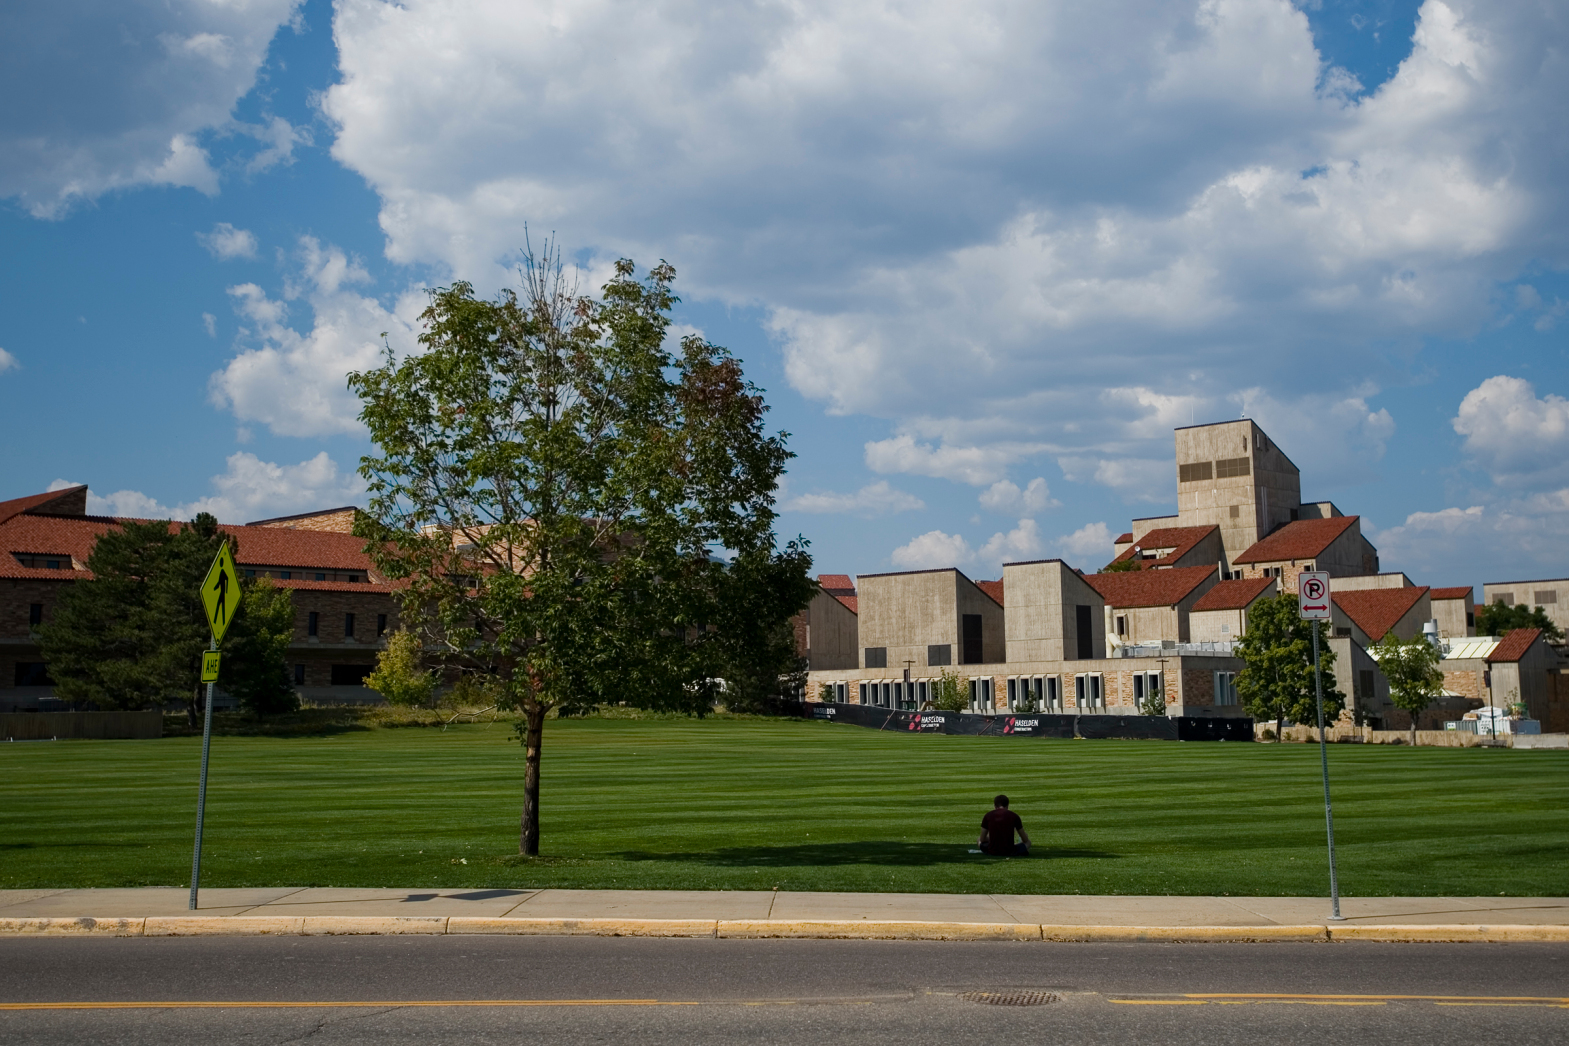 A University of Colorado Boulder student studies in the shade of a tree in front of Business Field with school buildings in the background.